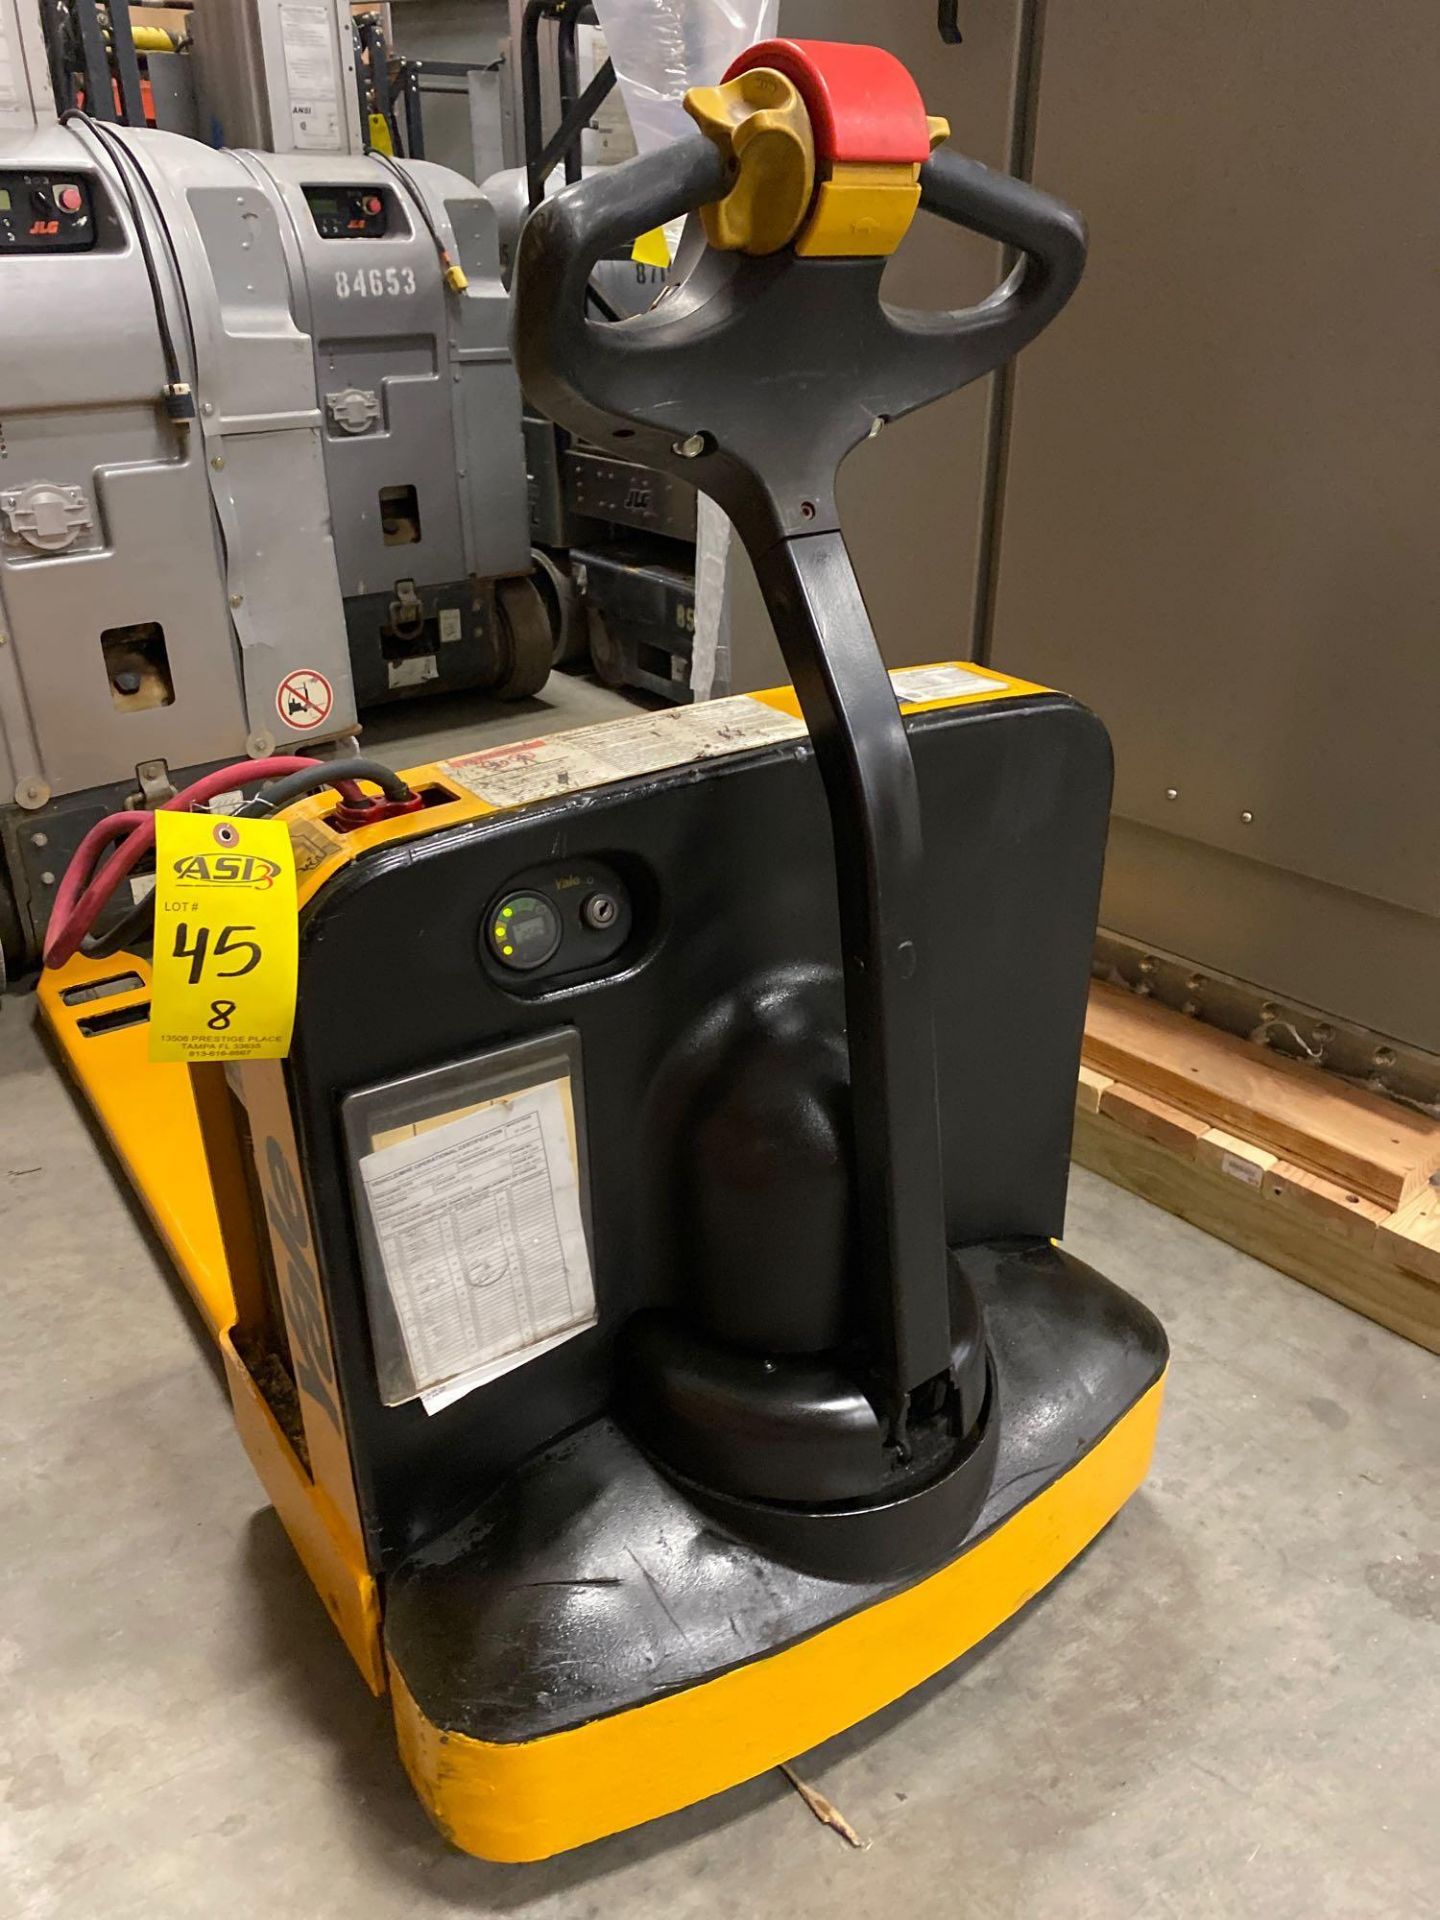 YALE ELECTRIC PALLET JACK MODEL MPW050, 24V, 5,000 LB CAPACITY, RUNS AND OPERATES - Image 2 of 5